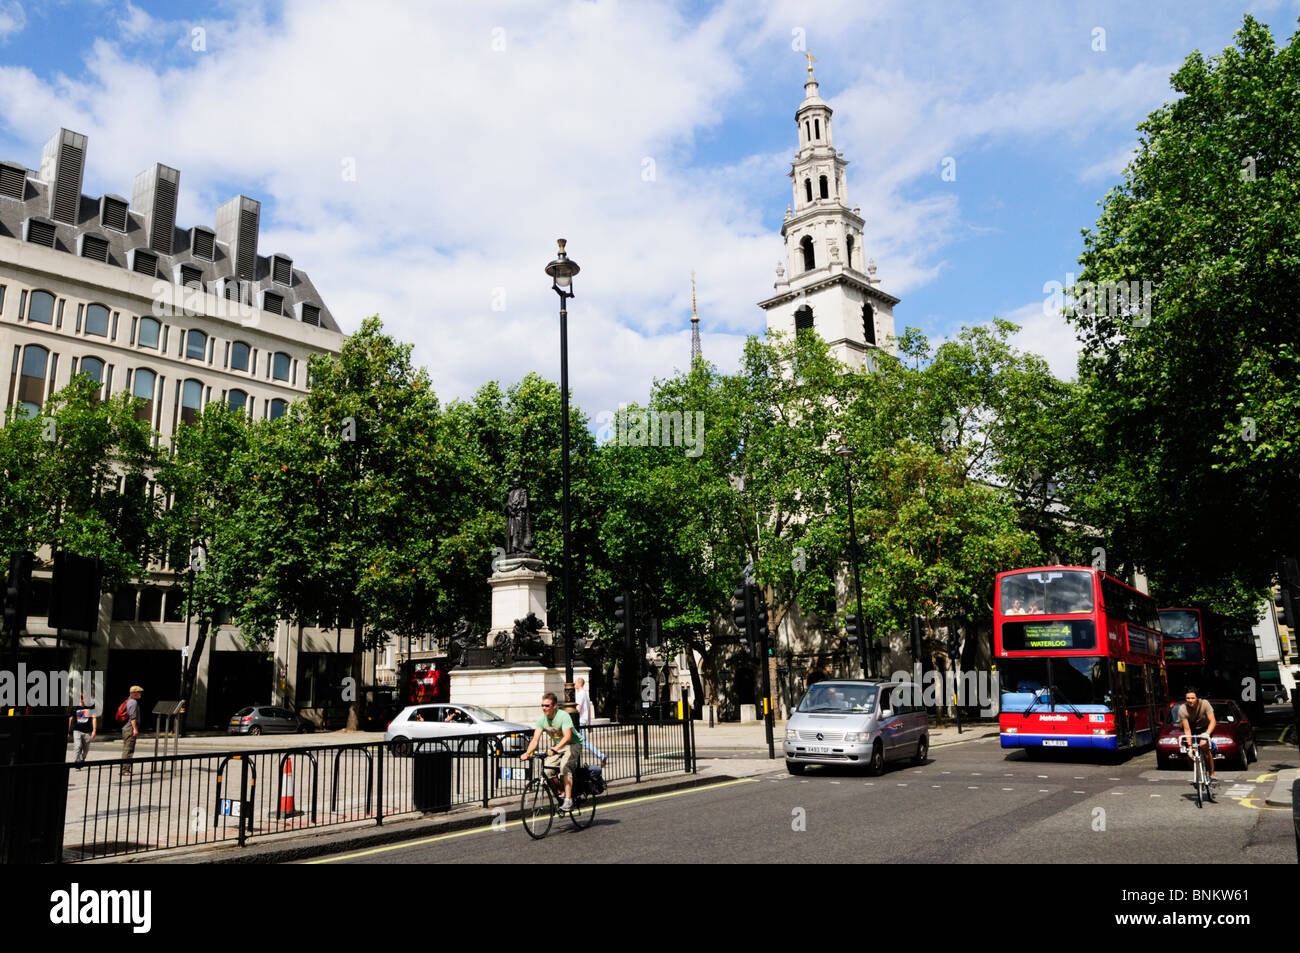 Street scene in The Strand near Aldwych  with Church of St Mary le Strand London England, UK Stock Photo